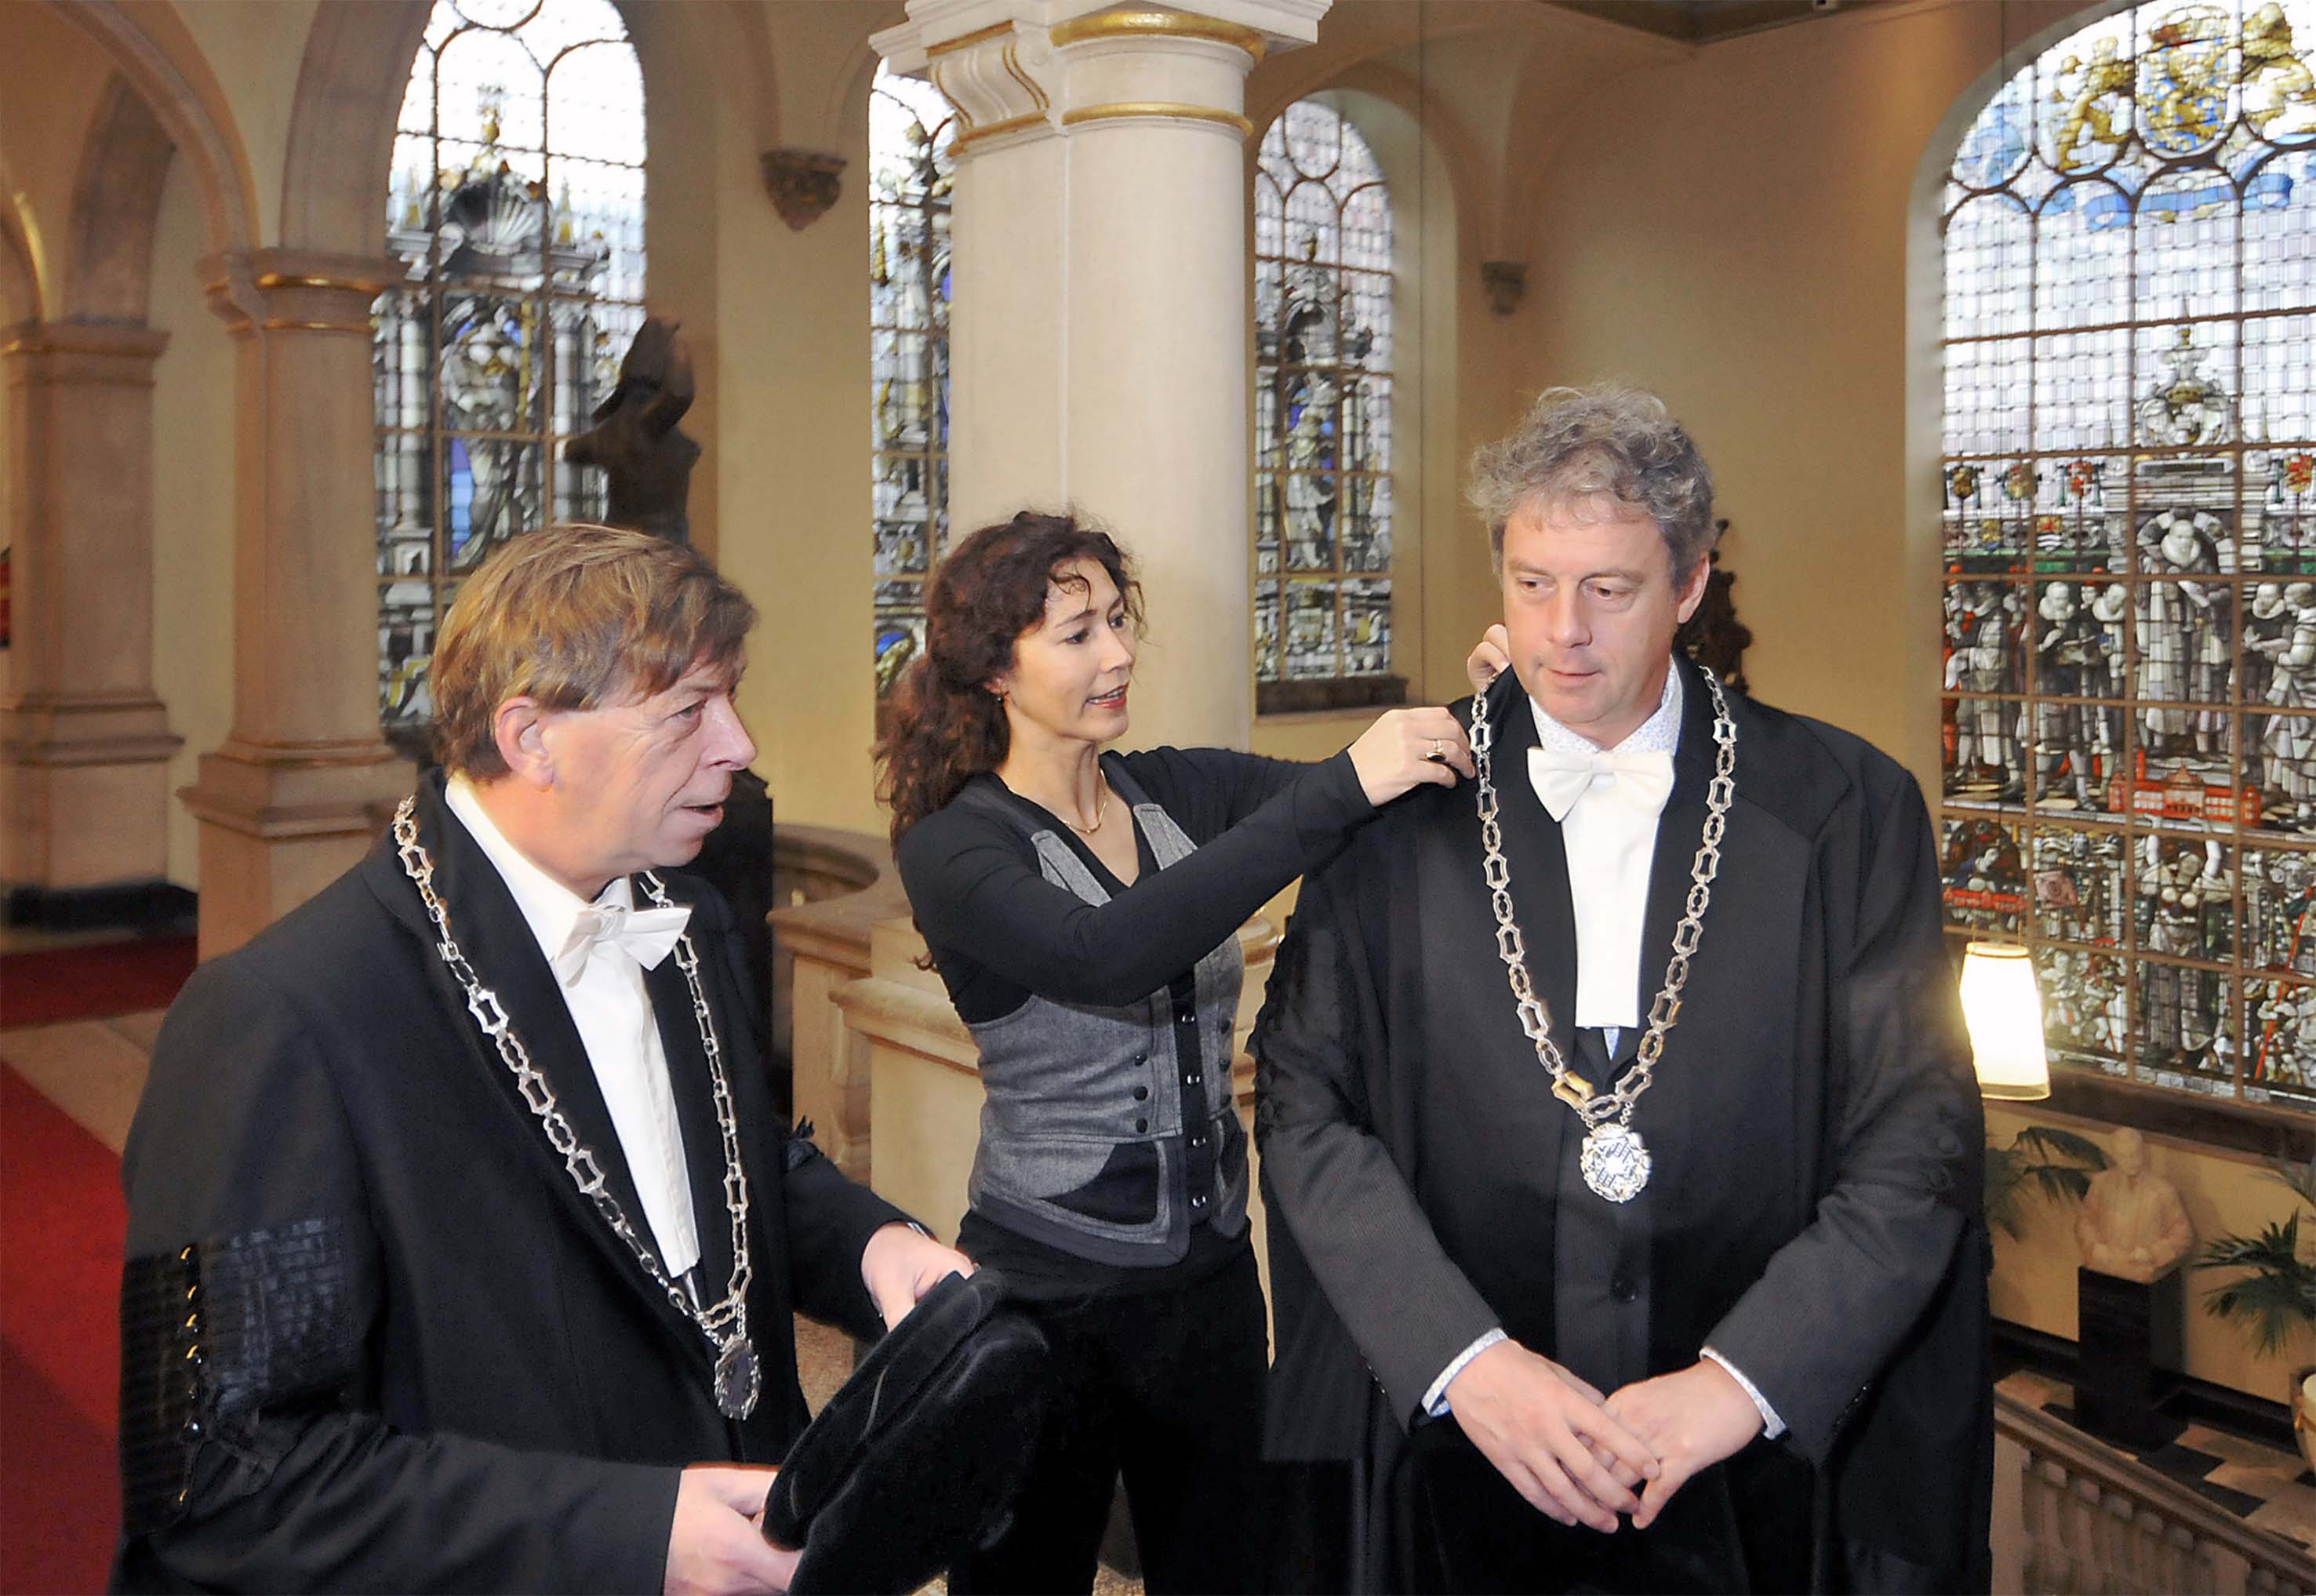 12 November 2010: Rector Magnificus Frans Zwarts as he leaves office and his successor Elmer Sterken prior to a photoshoot in the Academy Building. Monique Peperkamp (secretariat of the Rector) is in charge